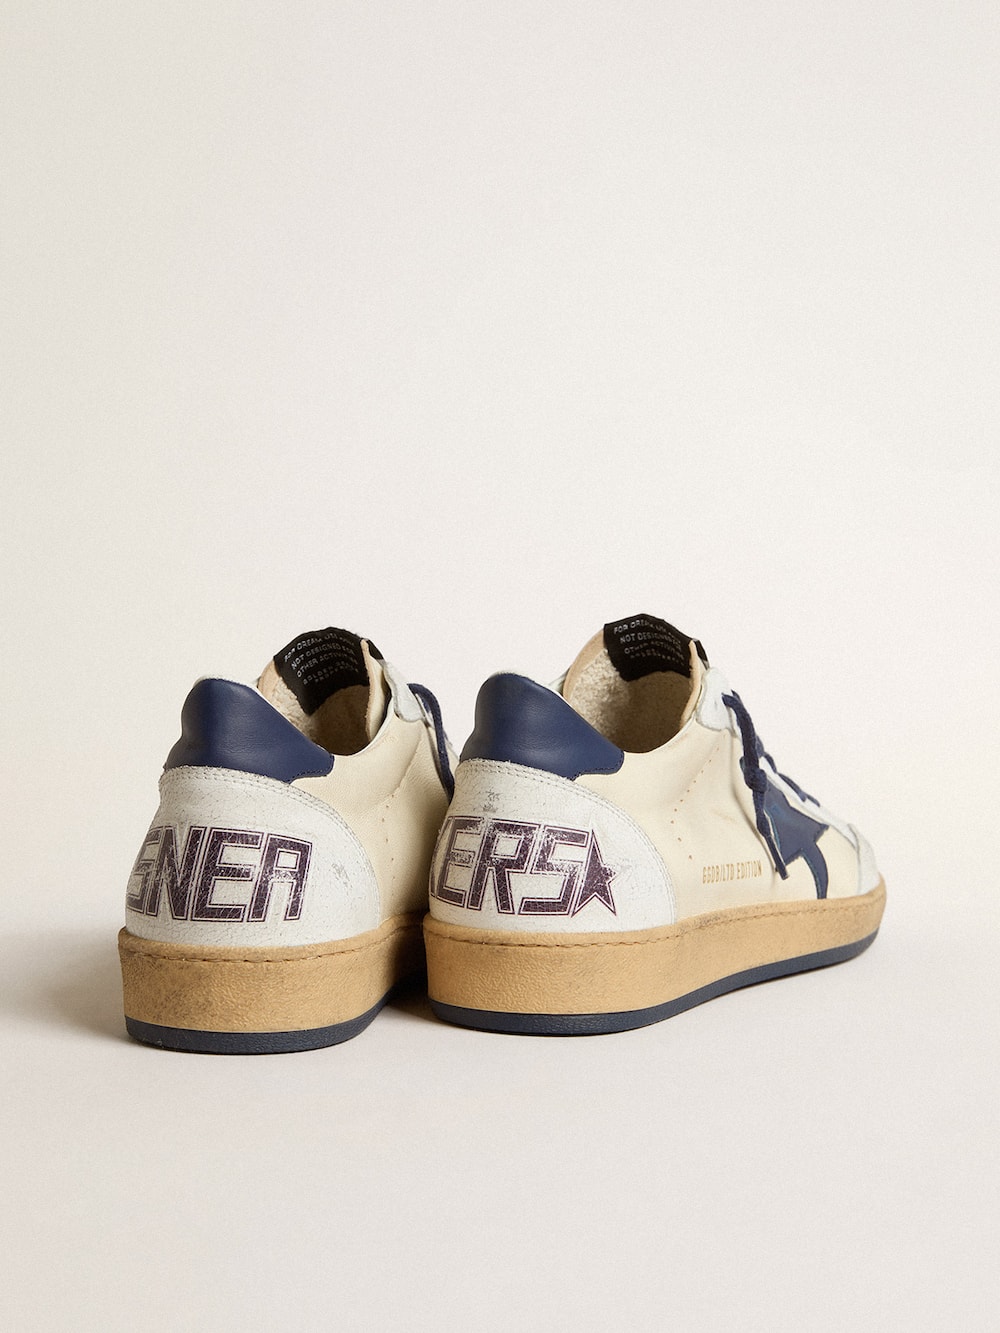 Golden Goose - Men's Ball Star LTD in cream nappa with blue leather star and heel tab in 